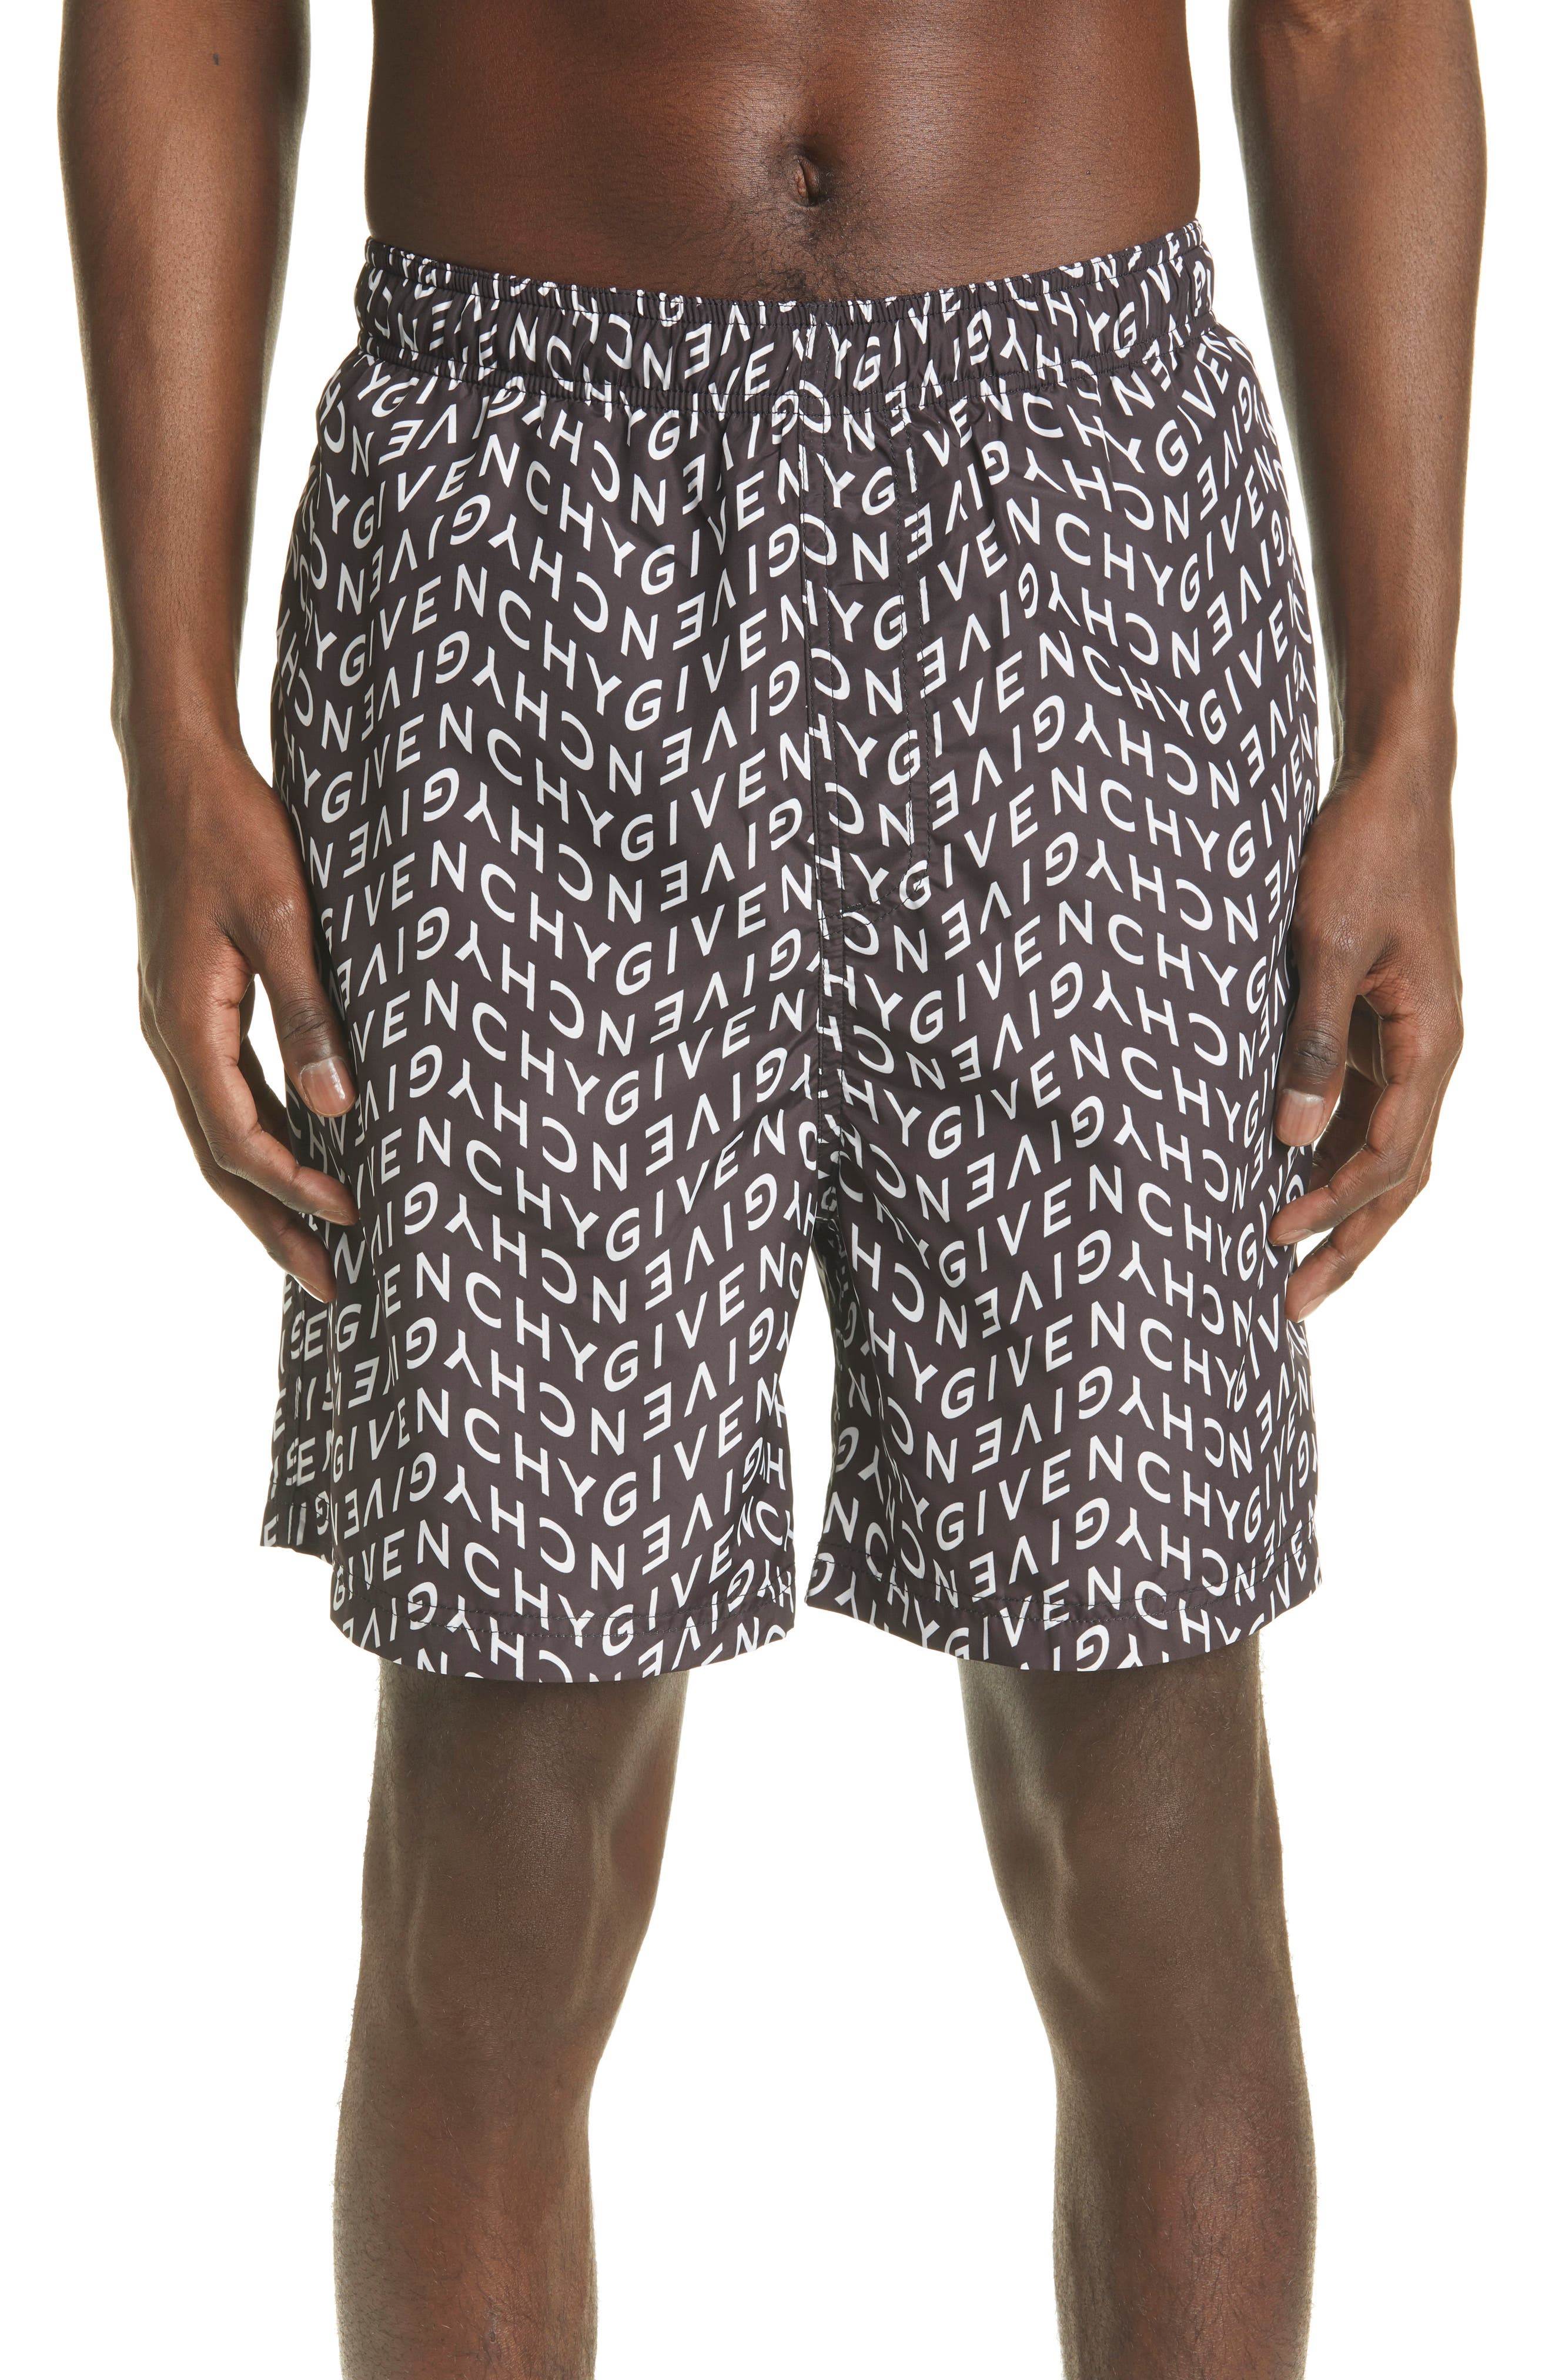 givenchy mens bathing suit